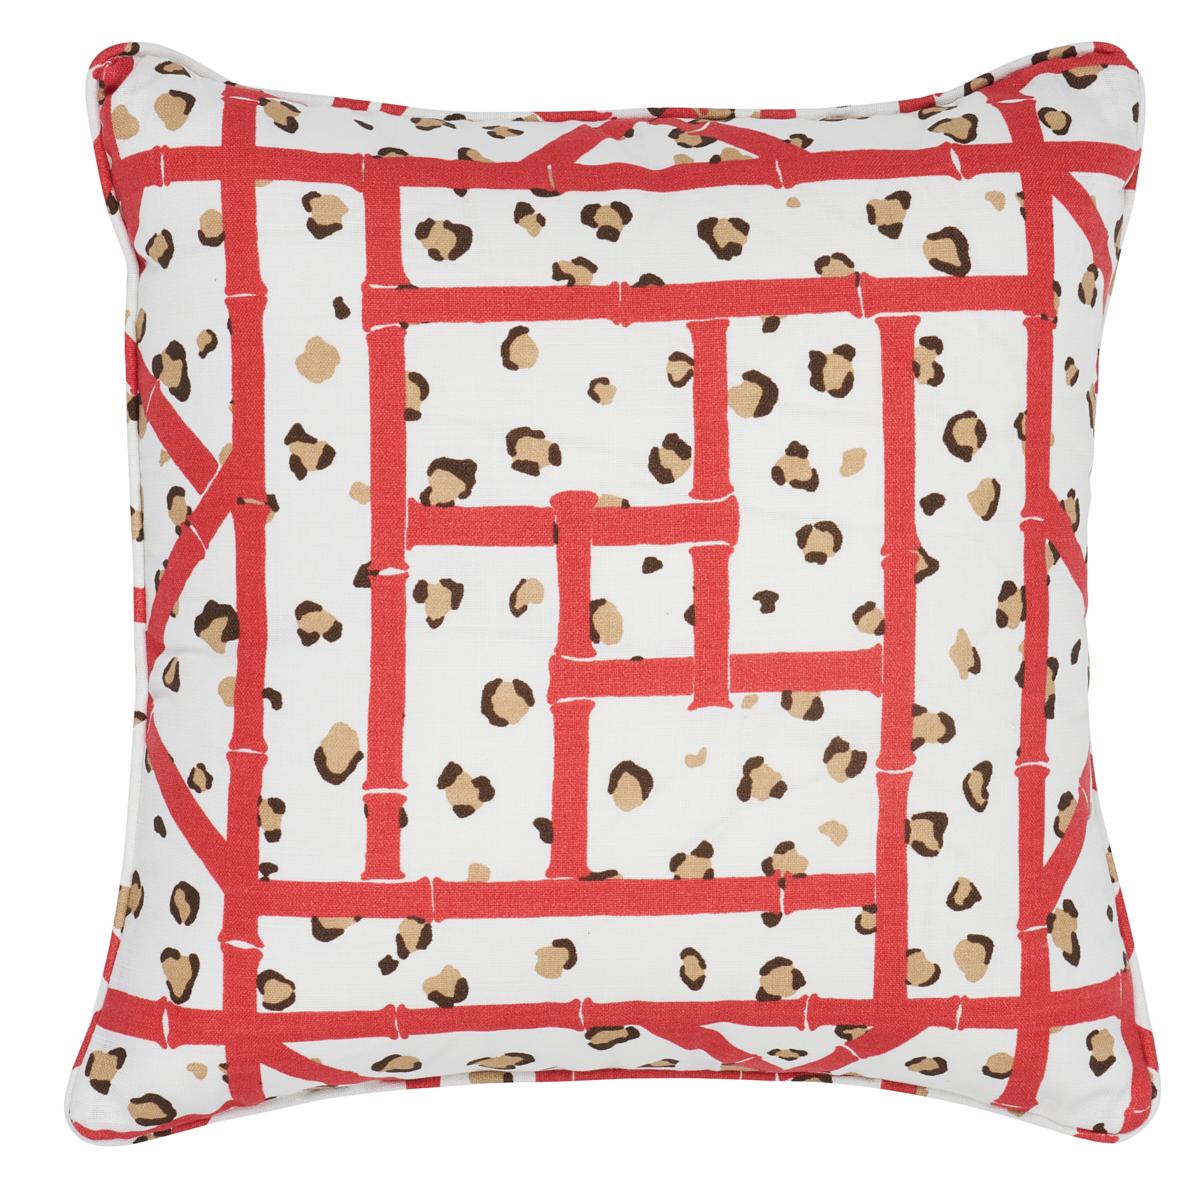 This pillow features Fancy Beasts Indoor/Outdoor with a knife edge finish. An imaginative take on familiar motifs, this stylish fabric features a chic combination of bamboo lattice and leopard spots. Pillow includes a polyfill insert and hidden